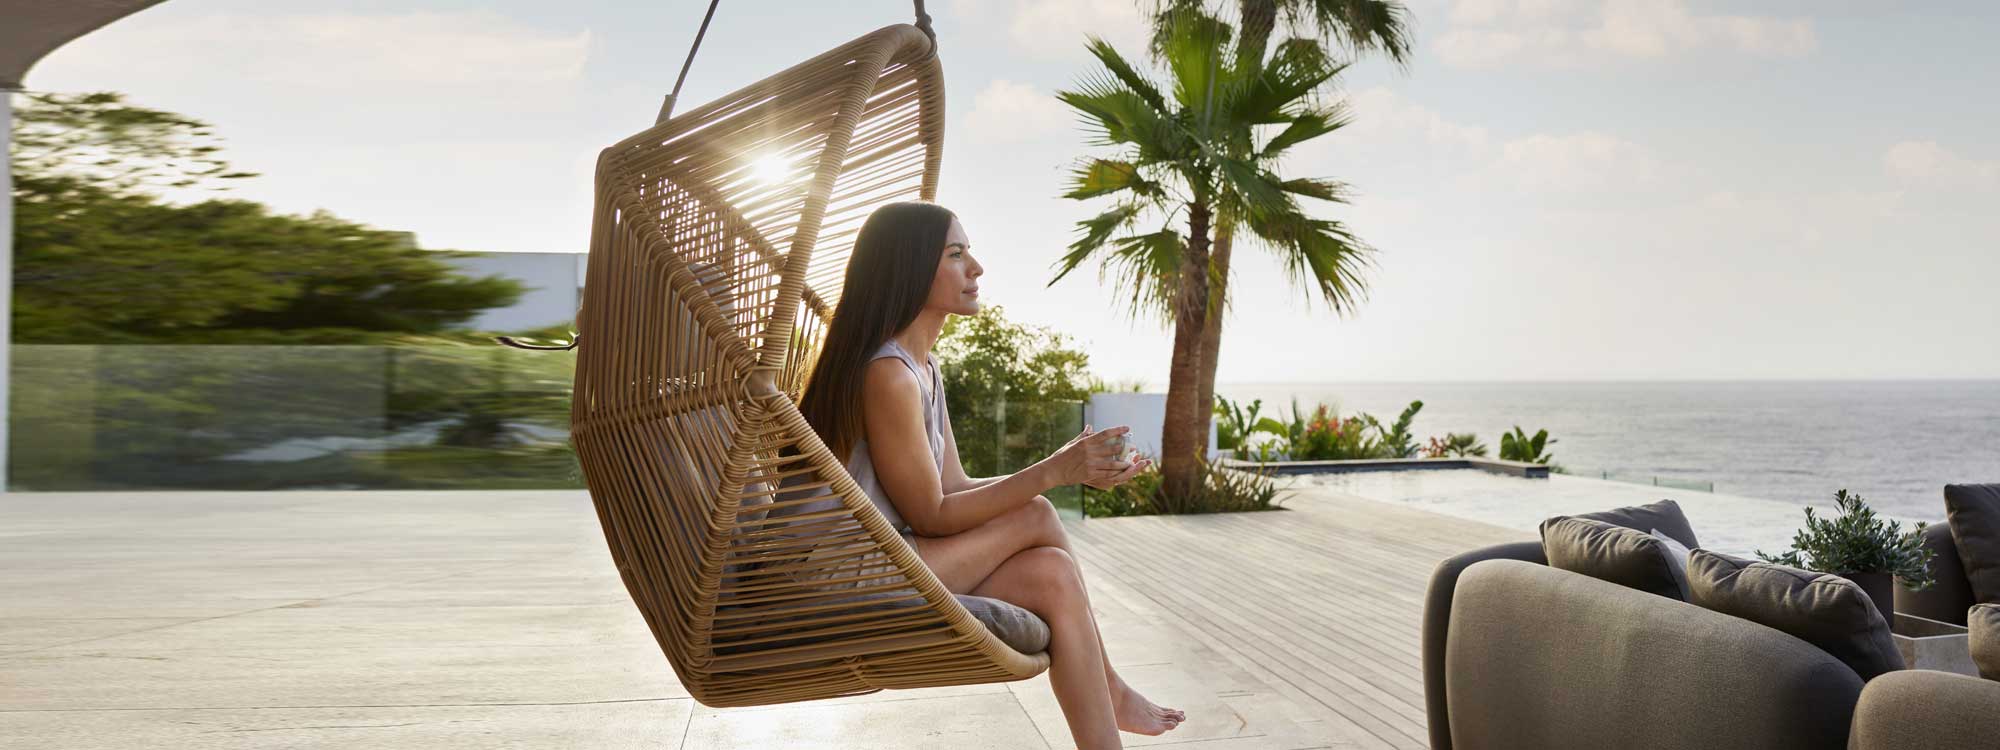 Image of woman sat contemplating in Hive modern garden swing chair by Cane-line on seaside terrace at sunset